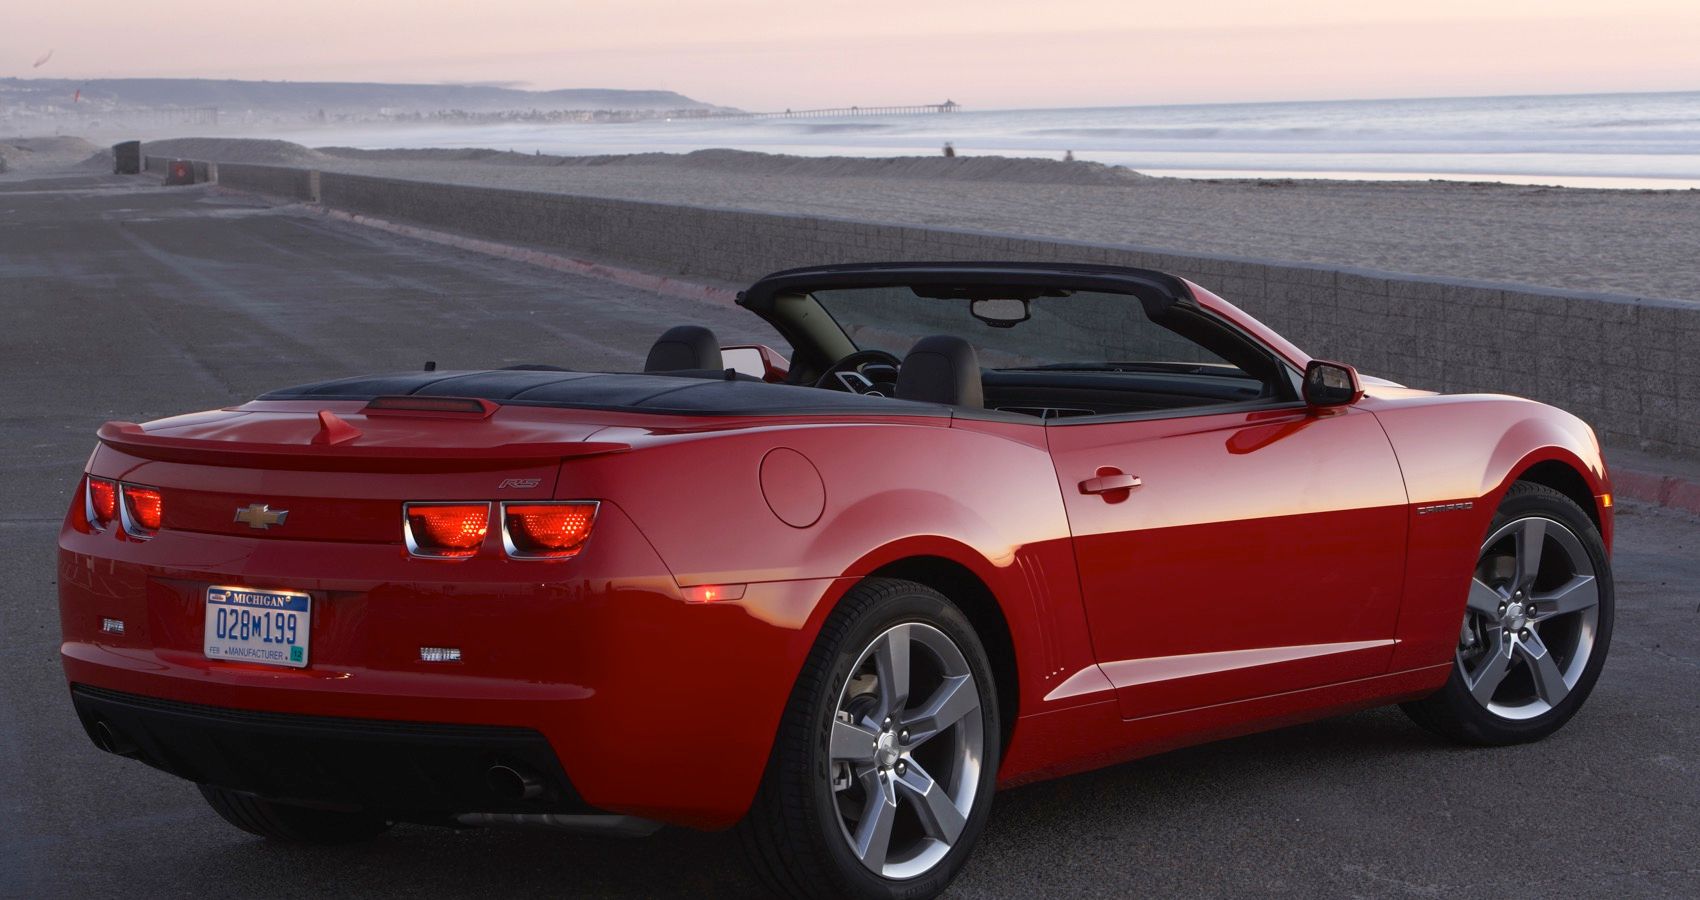 2011 Chevrolet Camaro Convertible in Red Rear View